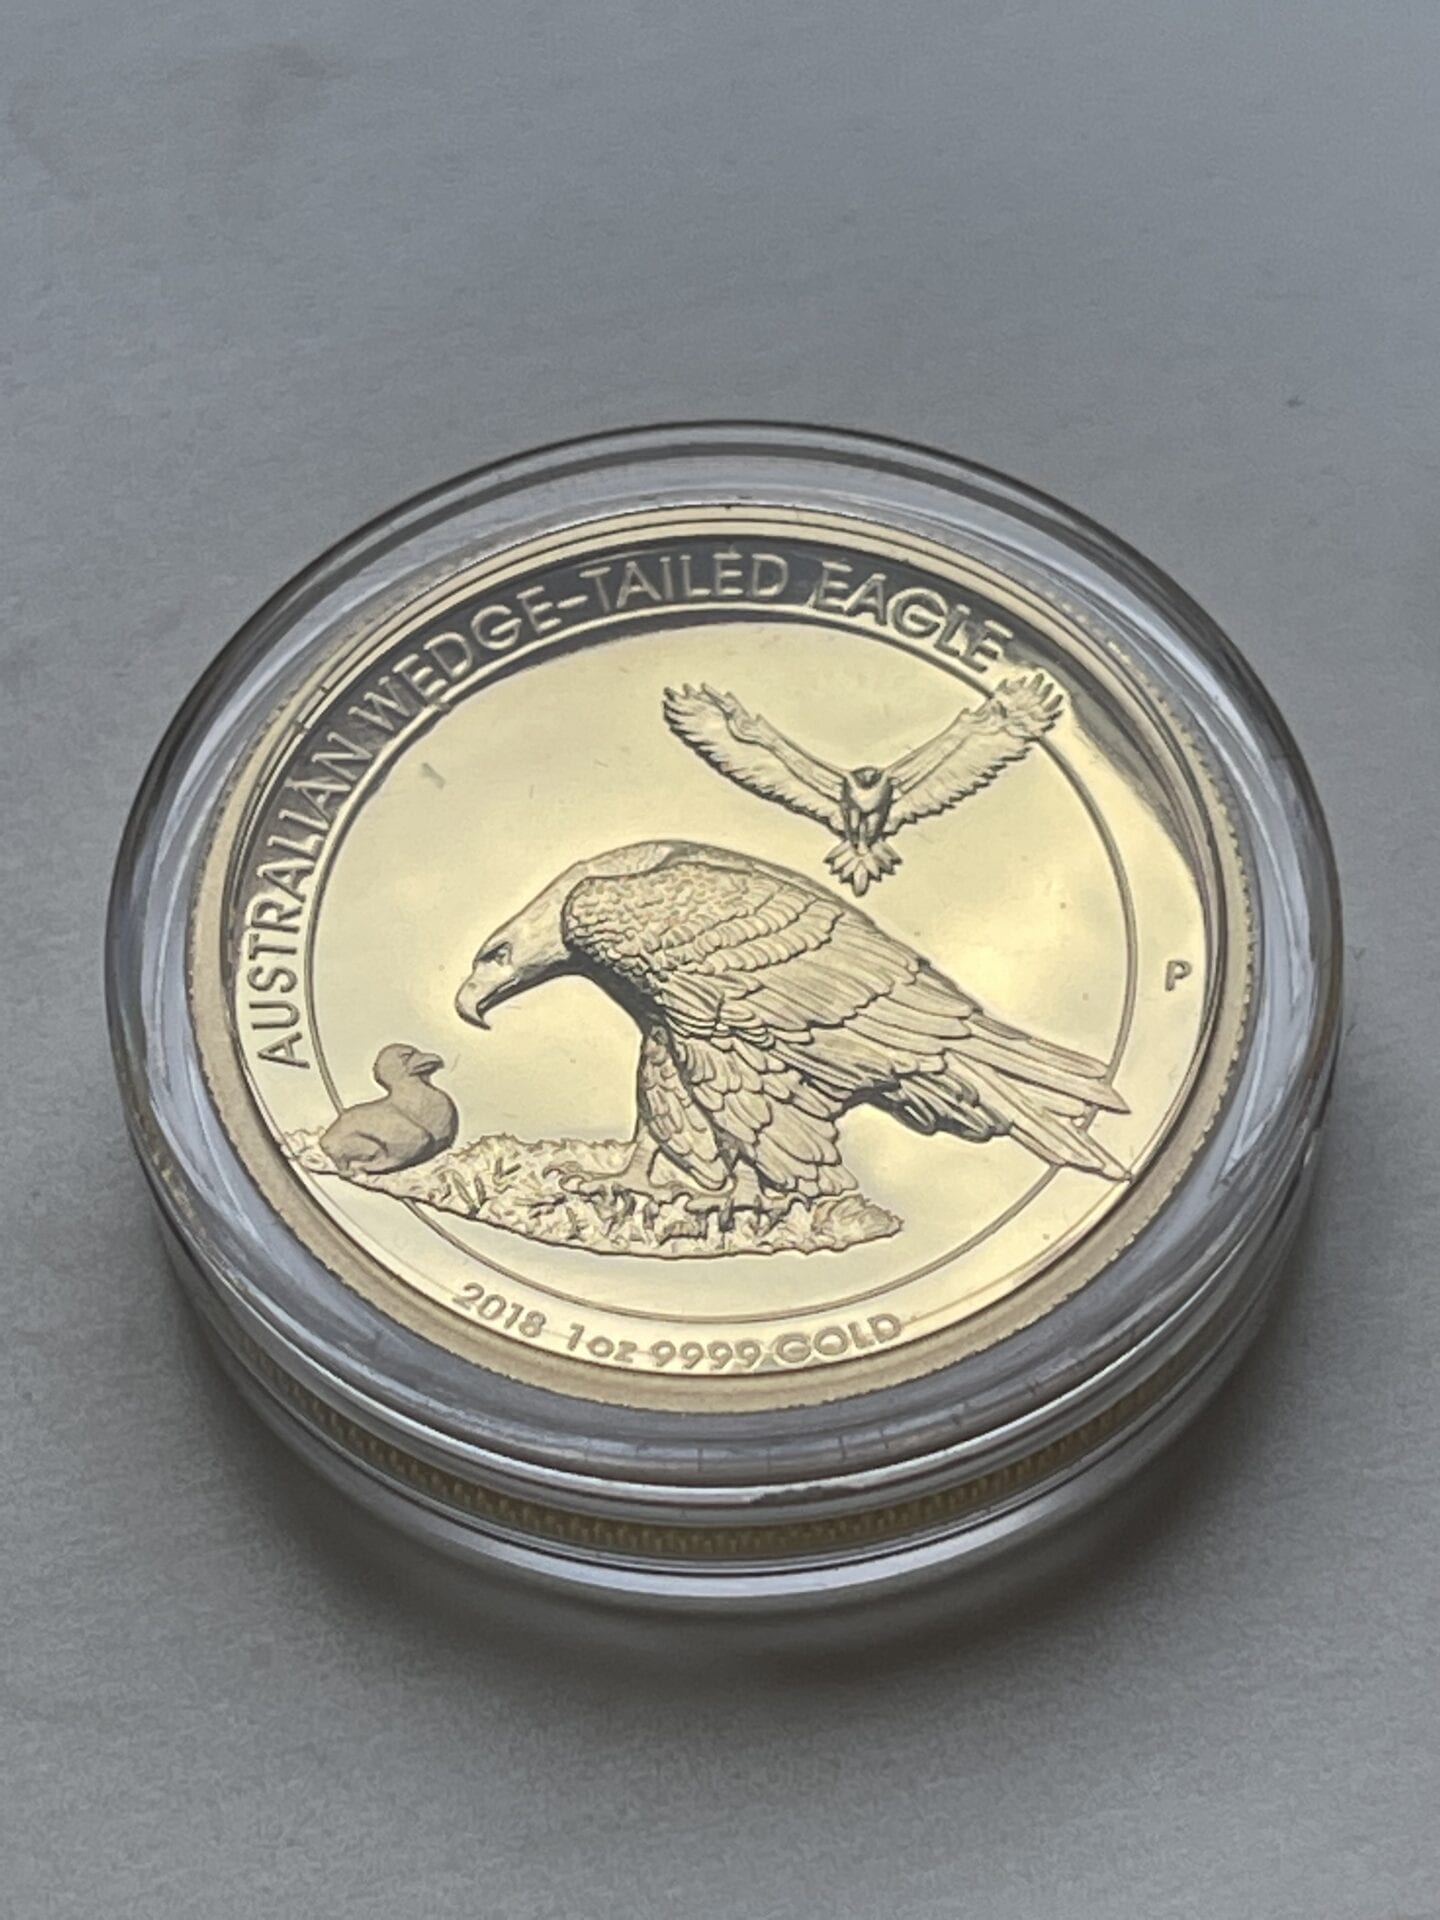 Gold Wedge Tailed Eagle 2018 1oz Perthmint